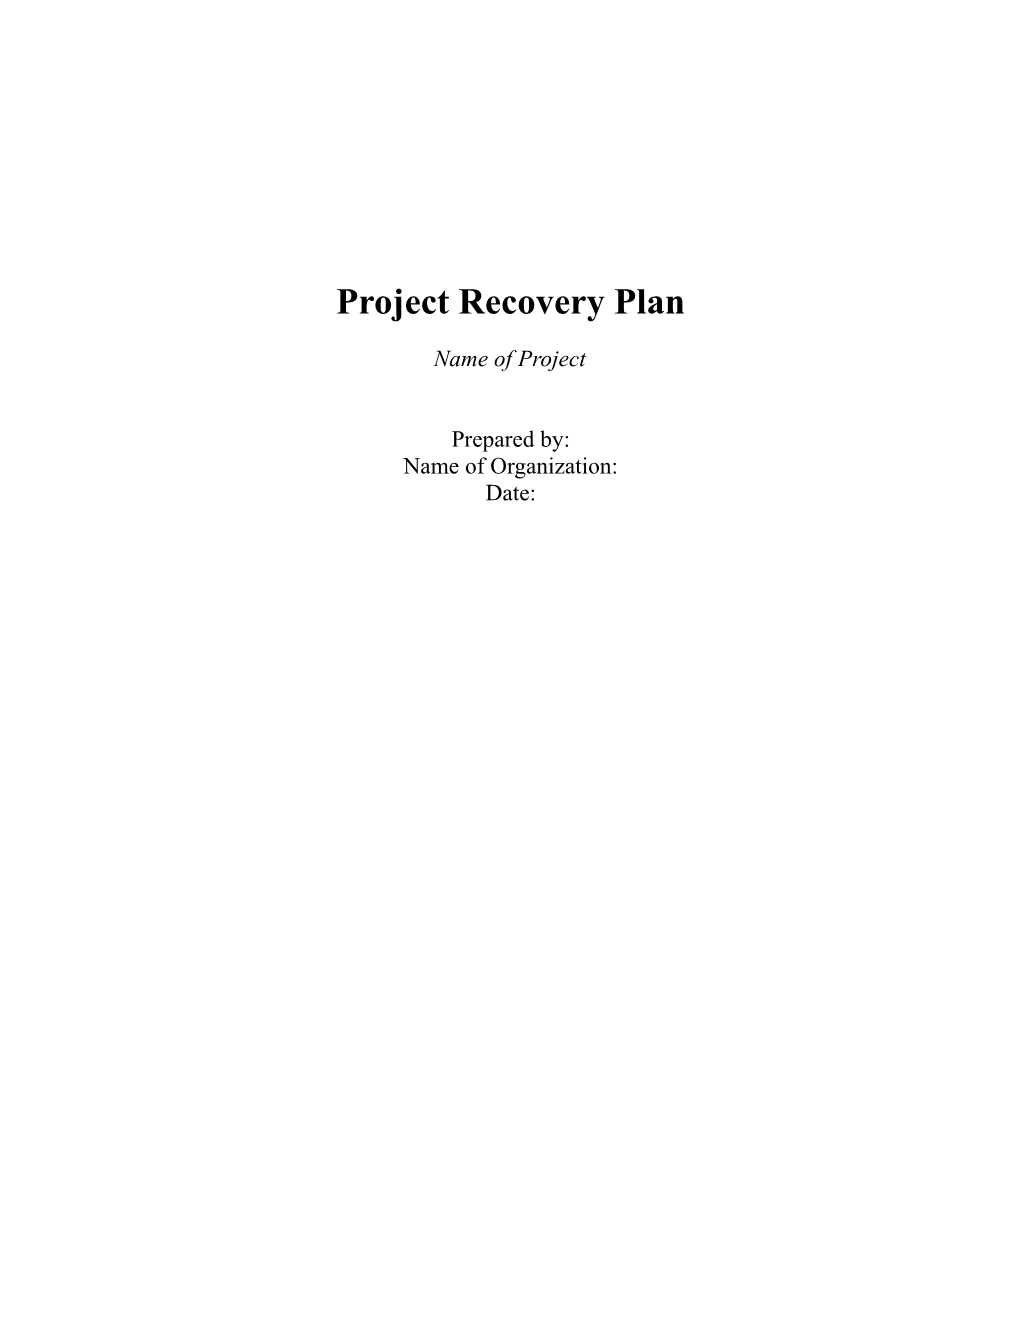 Project Recovery Plan